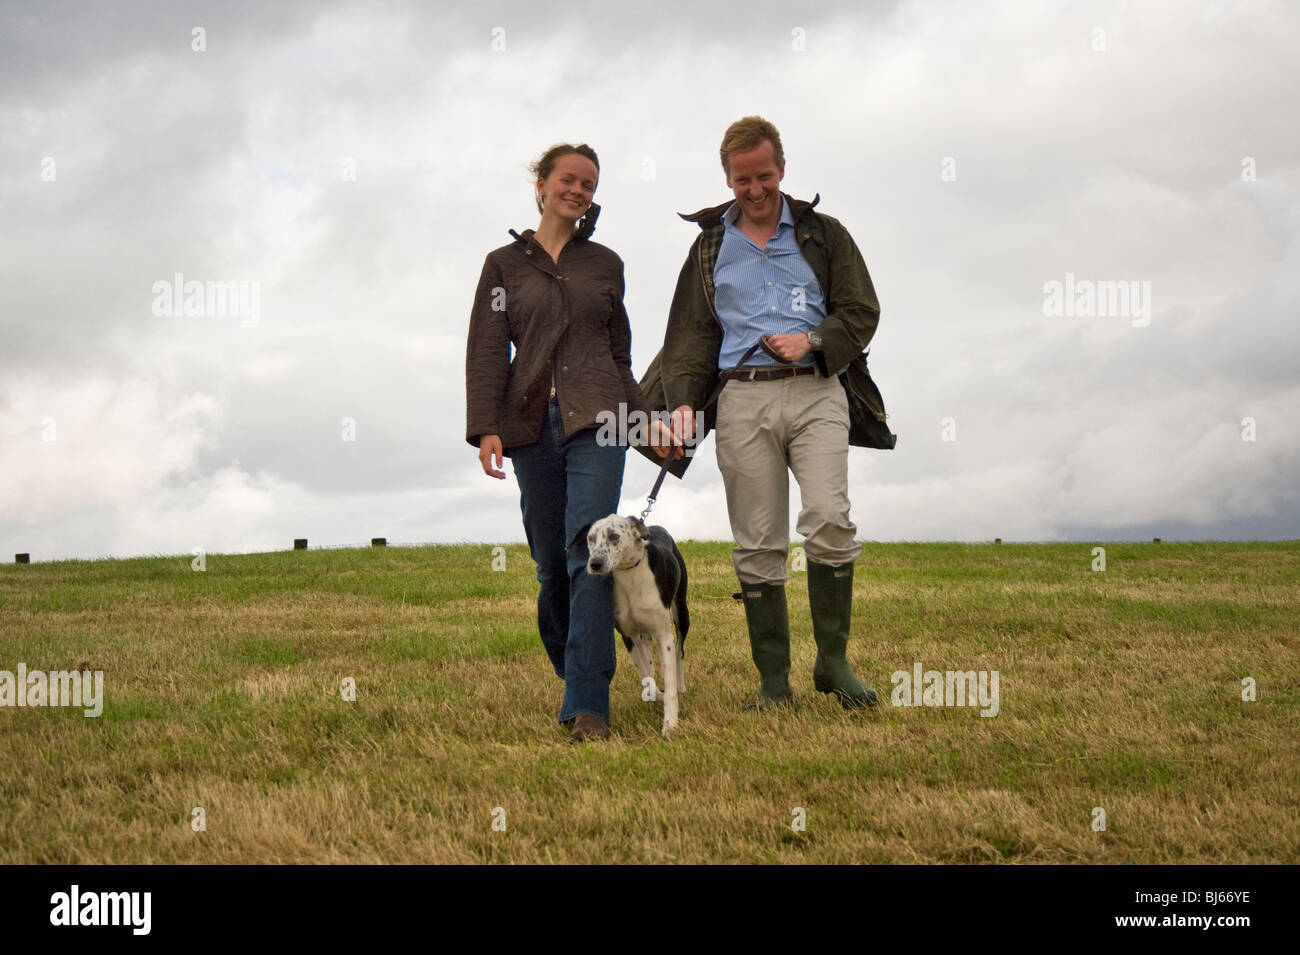 Married couple walking and enjoying their country lifestyle, Cumbria, uk Stock Photo